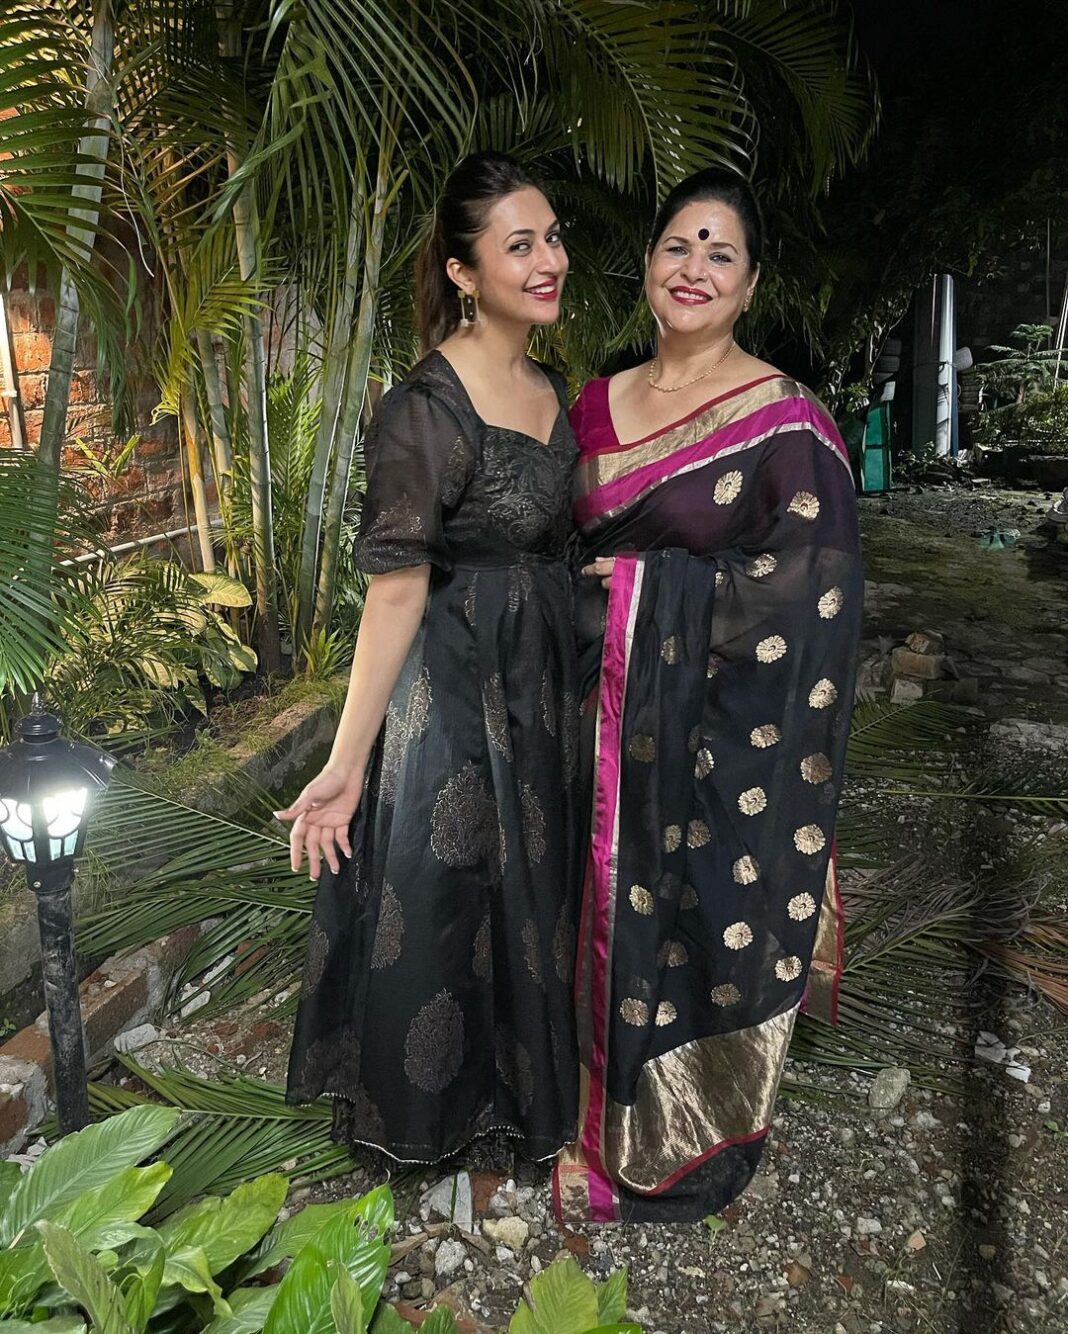 Divyanka Tripathi Instagram - Mummy, you are a paradox of a character sketch written for an average mother. You are possibly the strongest woman I've seen- mentally and physically, you have broken barriers, evolved yourself to better us, learnt new things with age no bar. You are simply unstoppable Mommy. You inspire us now and forever! Happy Mother’s Day! @neelam.tripathi121 @priyanka_sameer_tiwari @airbus.maestro #FamilyPhotoAlbum